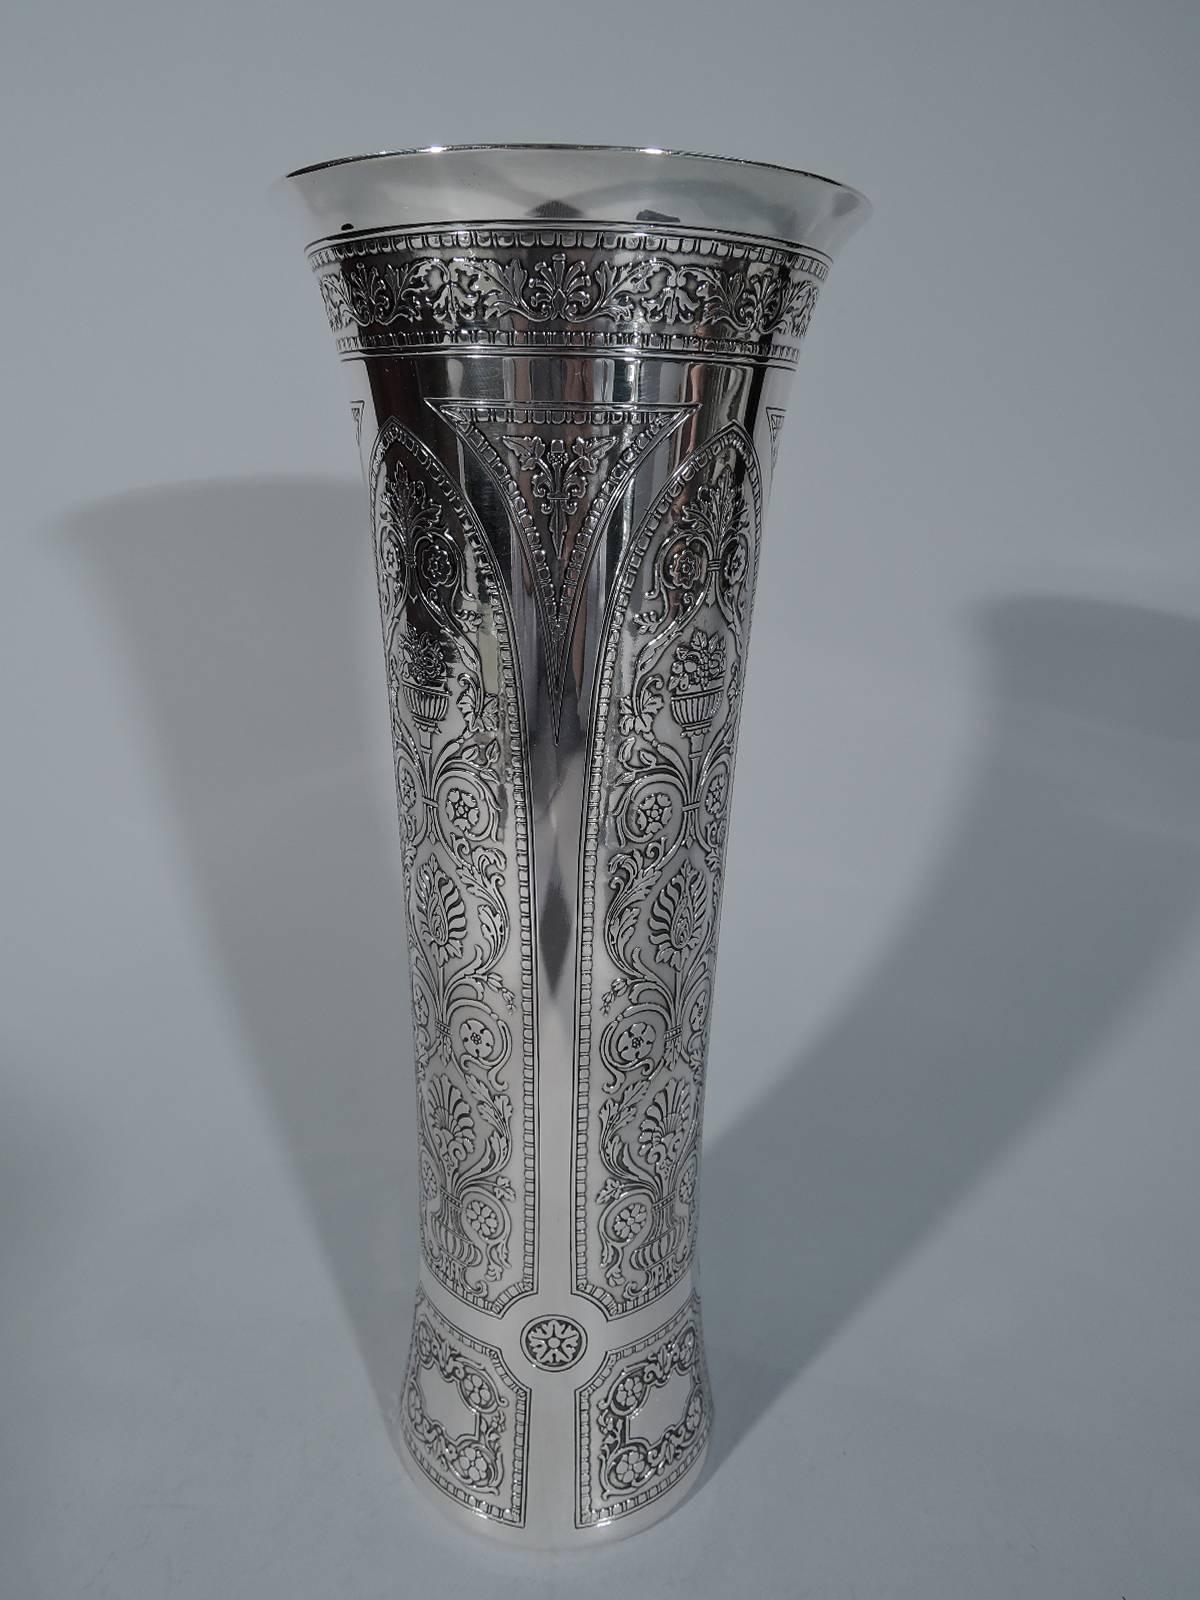 Sterling silver vase. Made by Tiffany & Co. in New York, circa 1912. Tapering cylinder with flared rim. Exterior has acid-etched frames with bead-and-reel borders and stylized vases, flowers, and leaves. A distinctive modernization of Edwardian